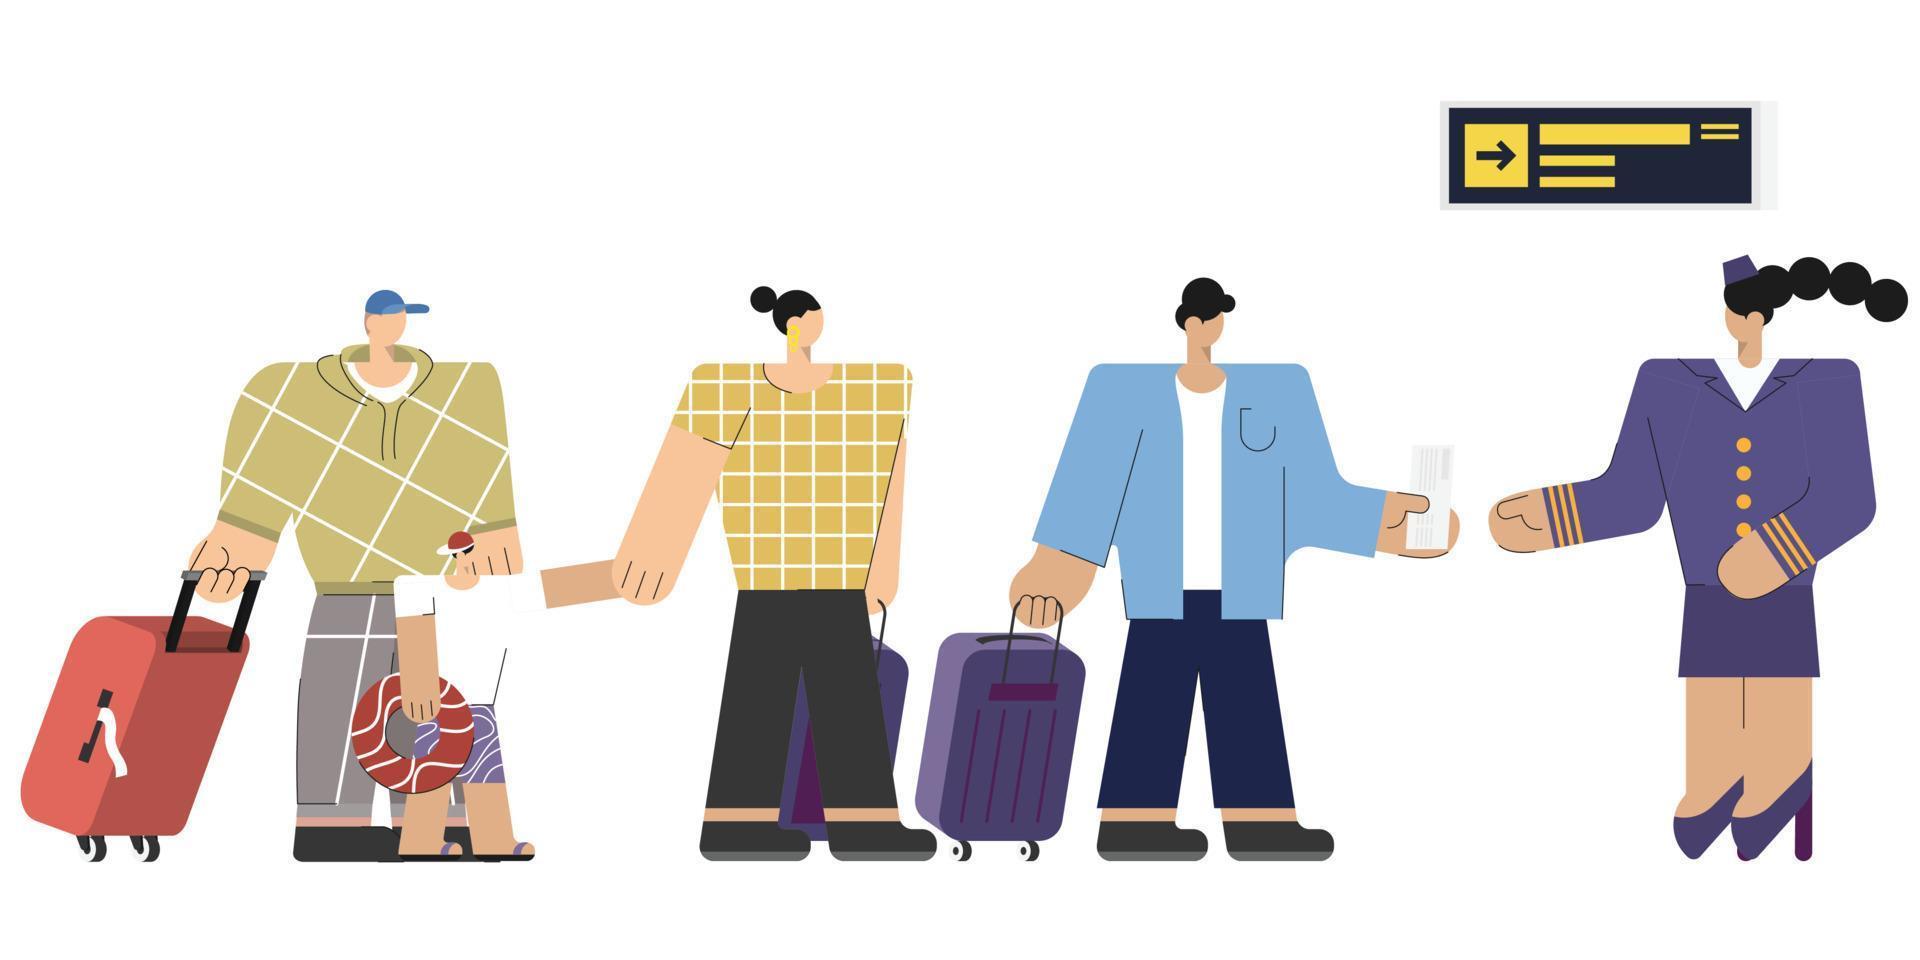 Airport departure area with plane boarding flight register tourists with luggage in queue check in for boarding plane departure, travelers aircraft vector illustration